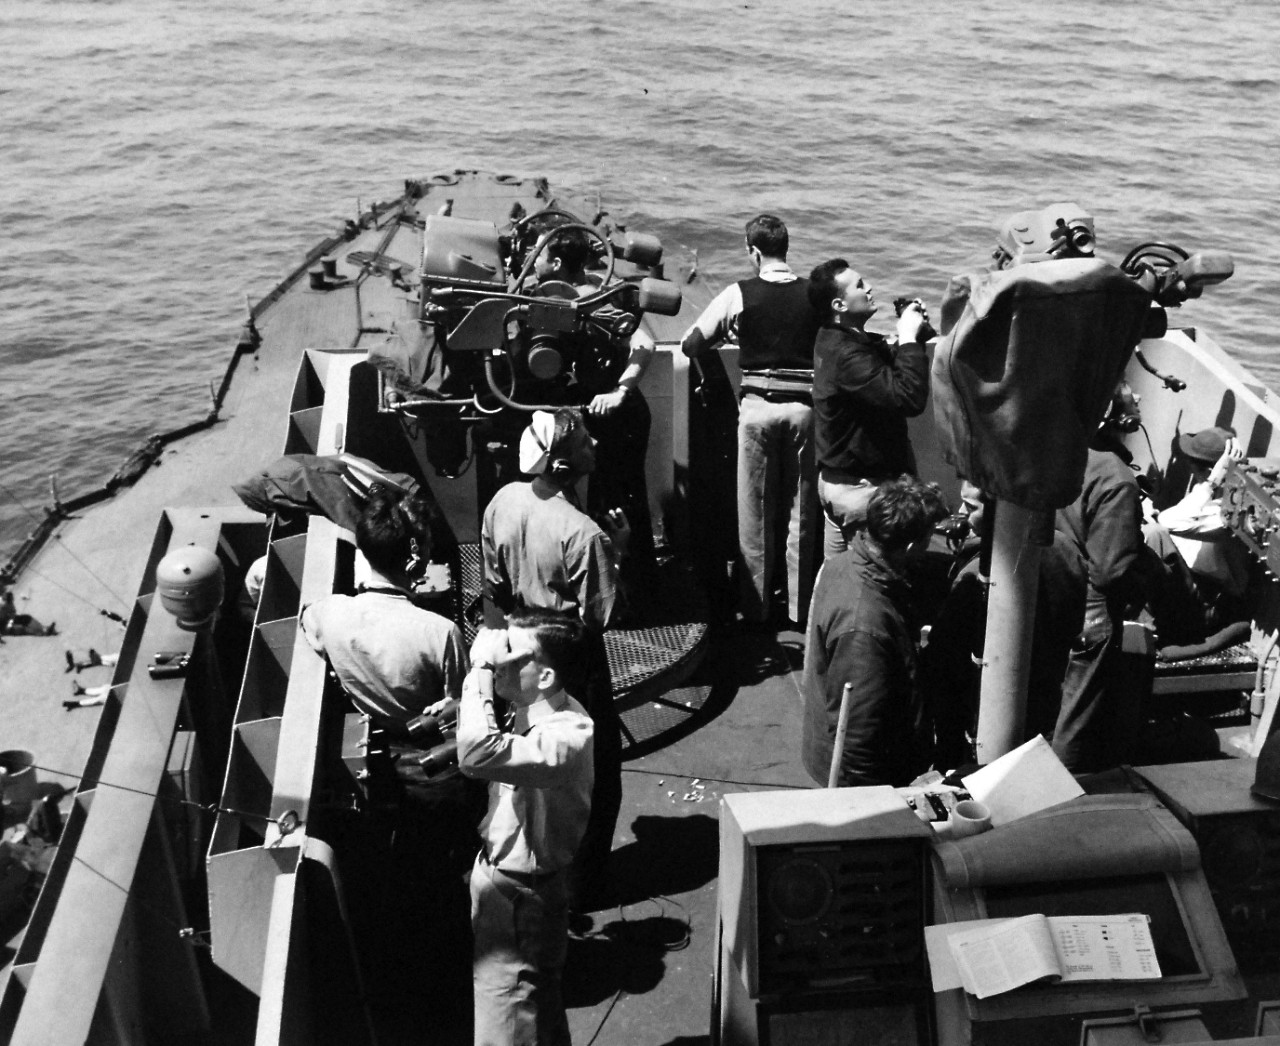 80-G-244200:  Normandy Invasion, U.S. Navy Ships, June 1944.    USS Arkansas (BB-33), officers and men, on the lookout for enemy planes during invasion of Normandy, France.  Photograph June 14, 1944.    Official U.S. Navy photograph, now in the collections of the National Archives.  (2016/10/04).